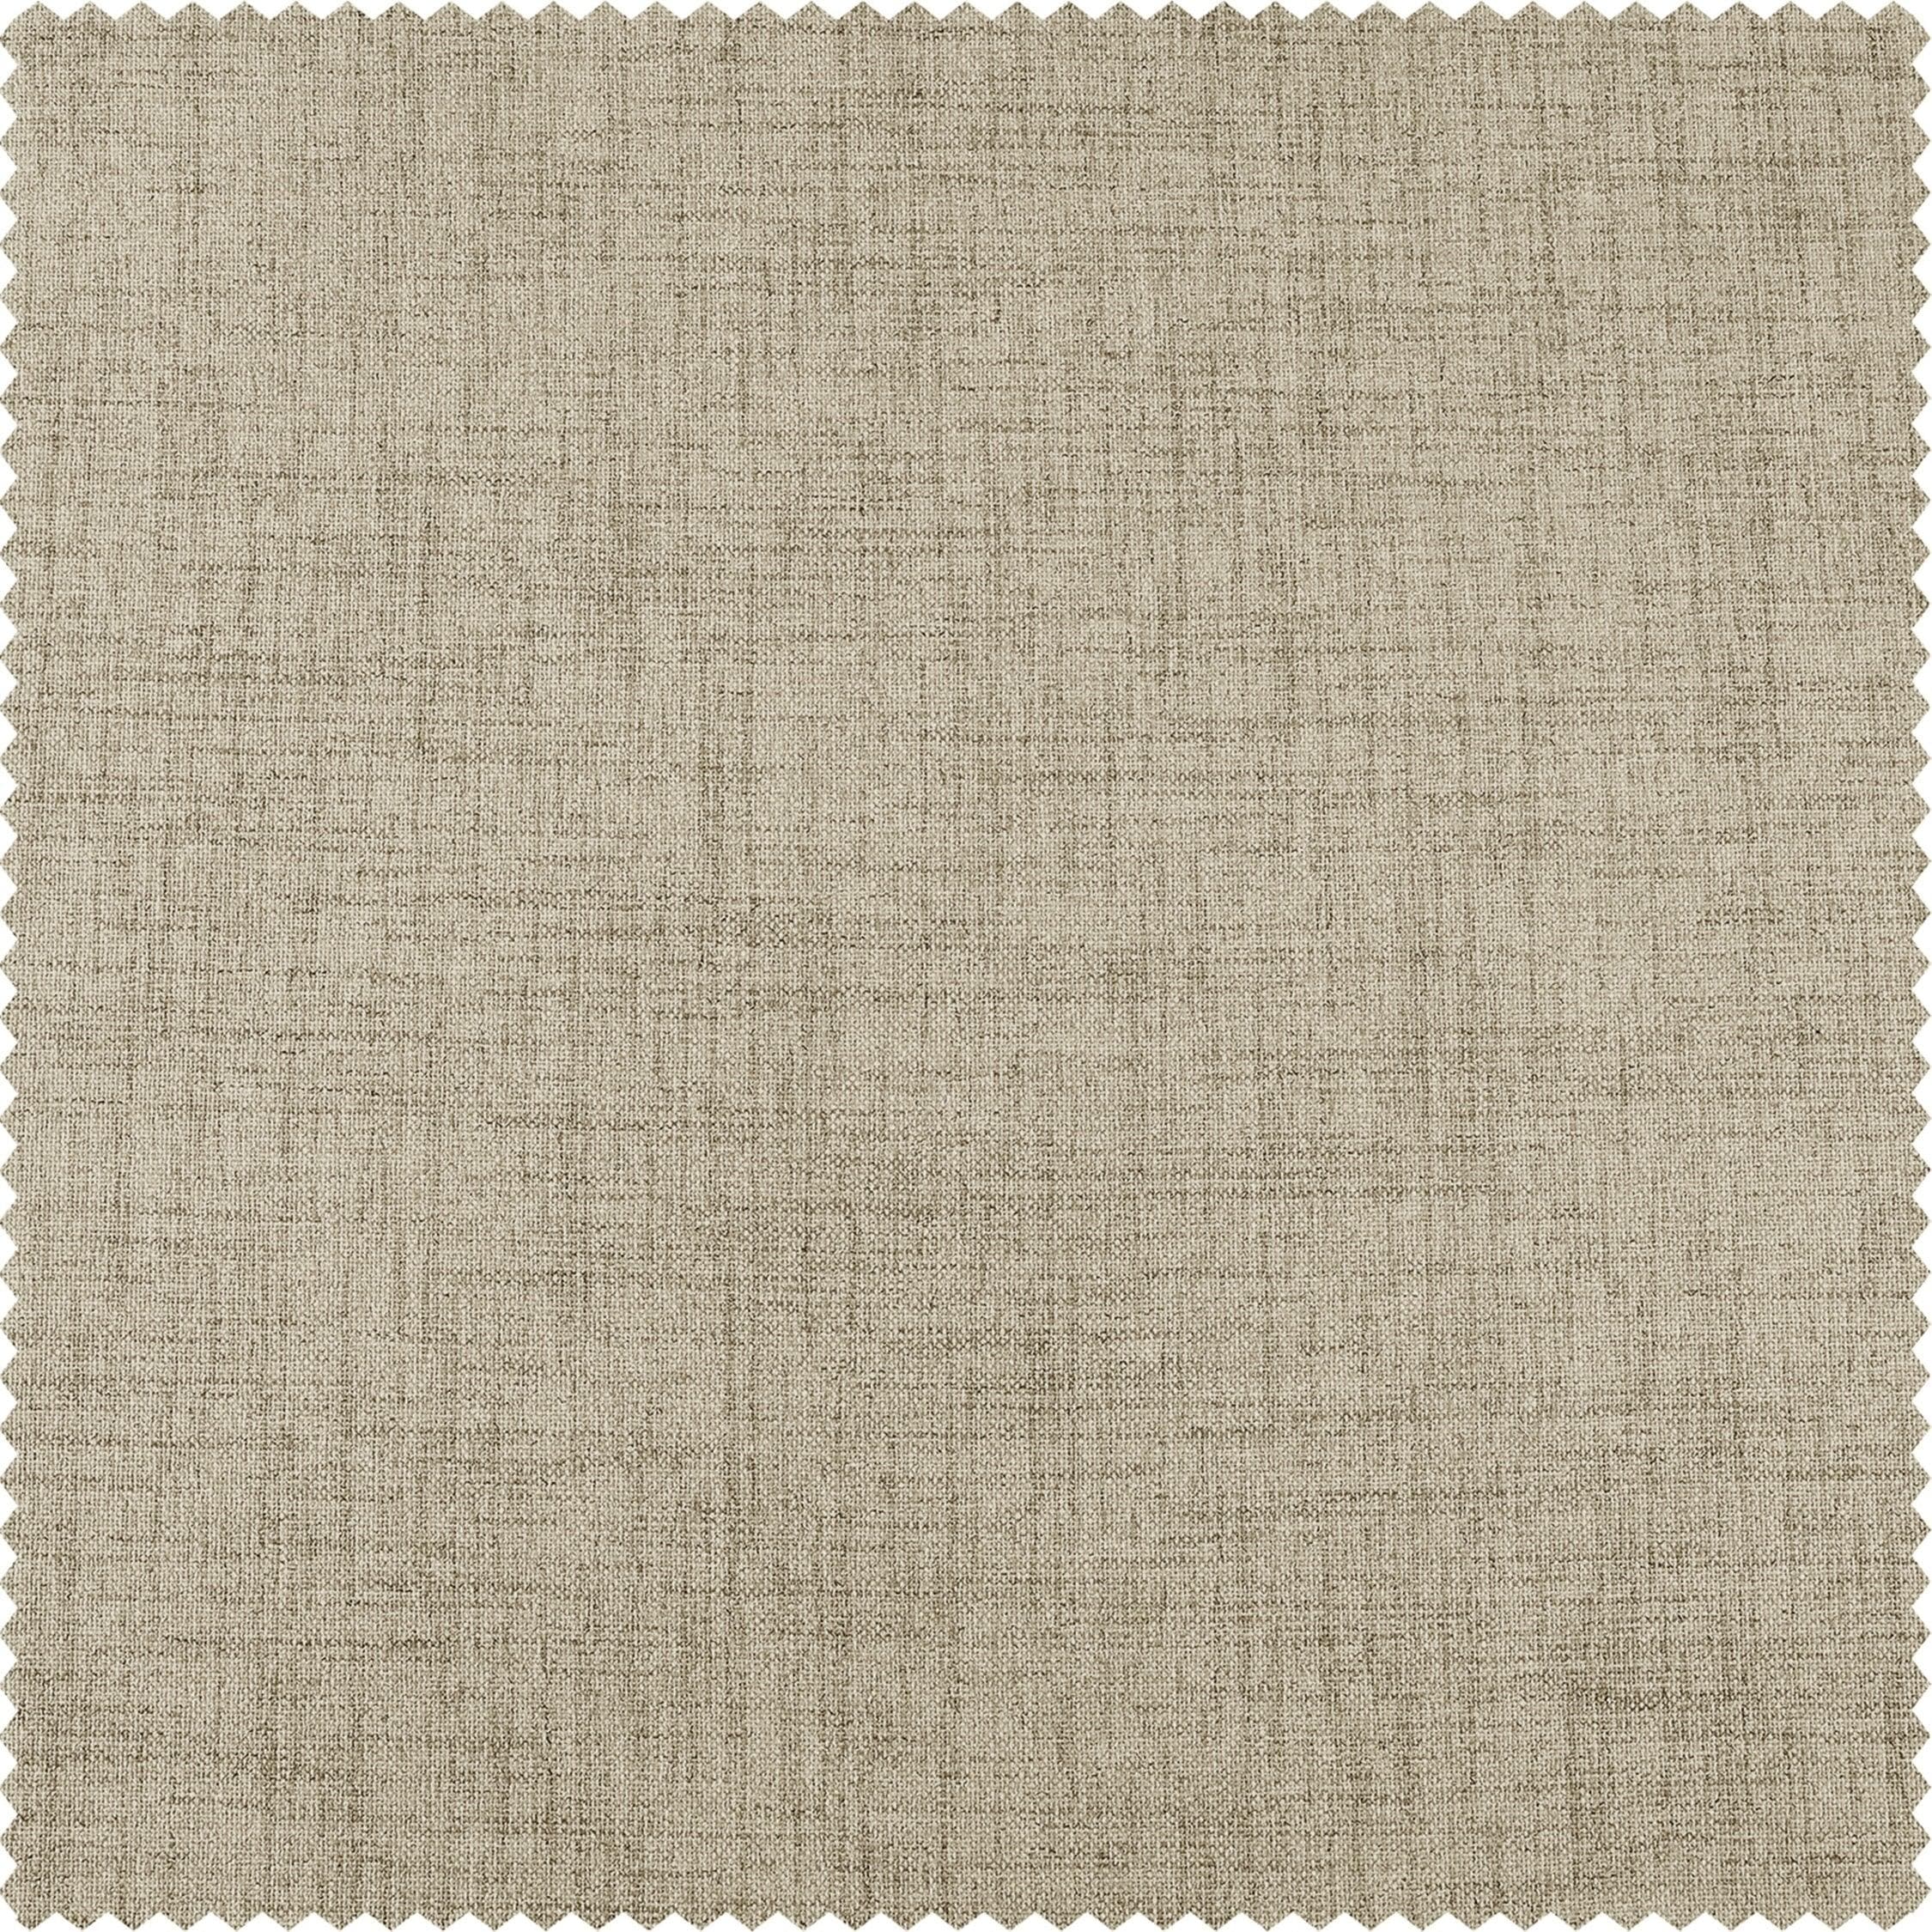 Toasted Tan Thermal Cross Linen Weave Swatch